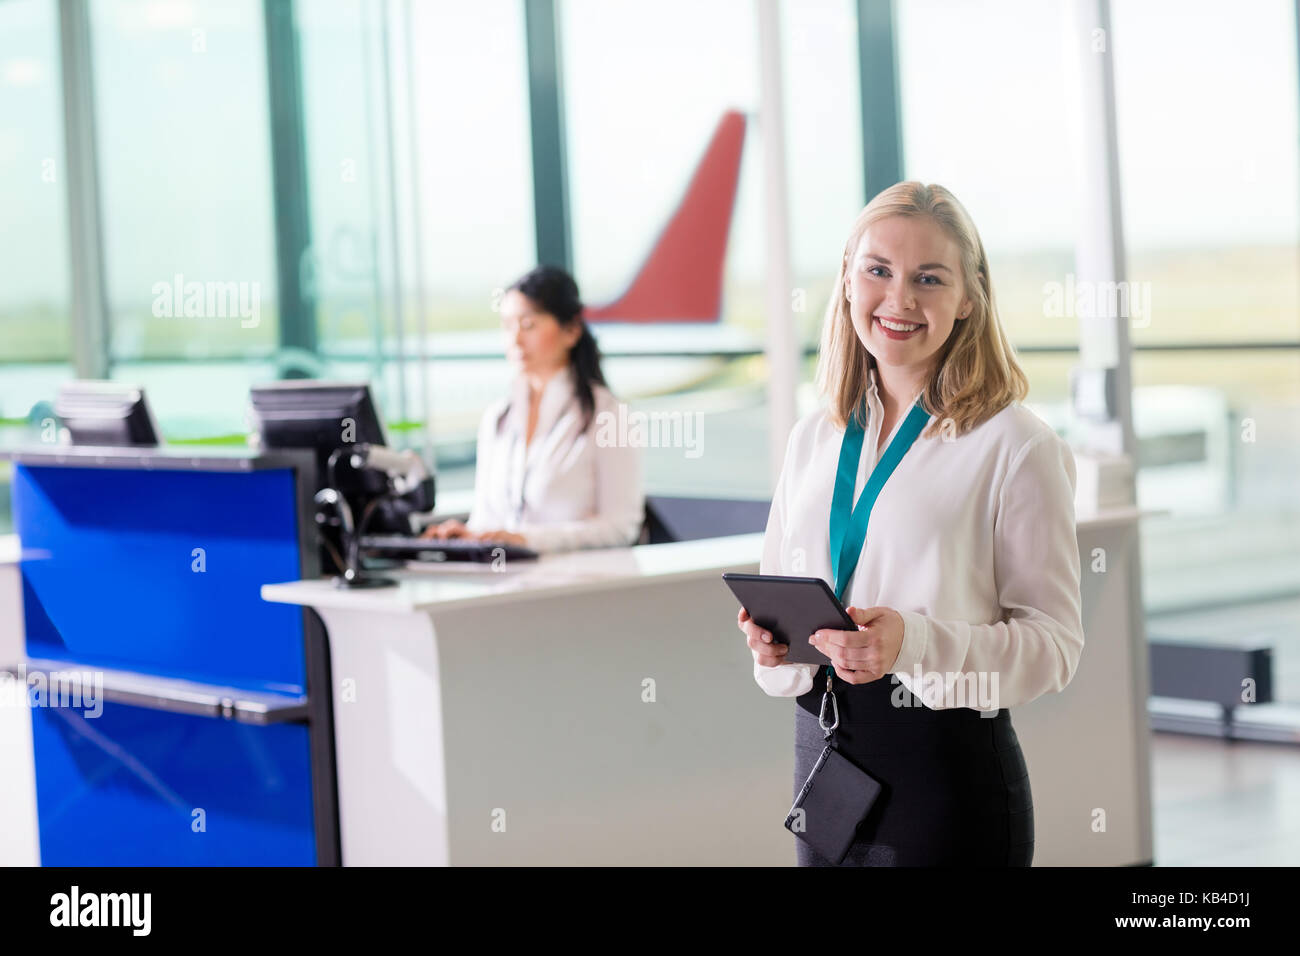 Portrait of young ground staff holding digital tablet while colleague working at reception in airport Stock Photo